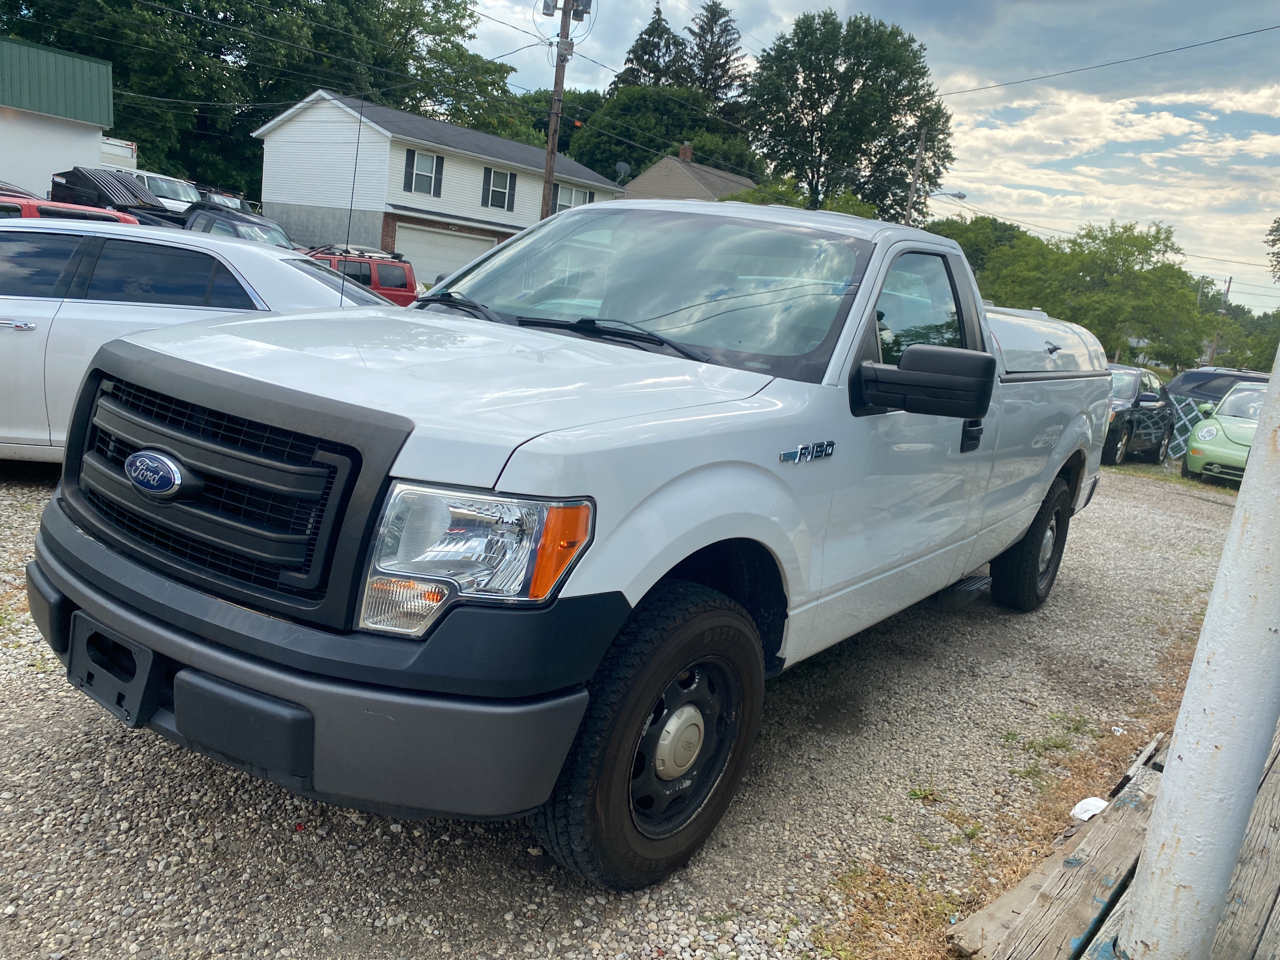 Ford F-150 XLT 8-ft. Bed 2WD 2013